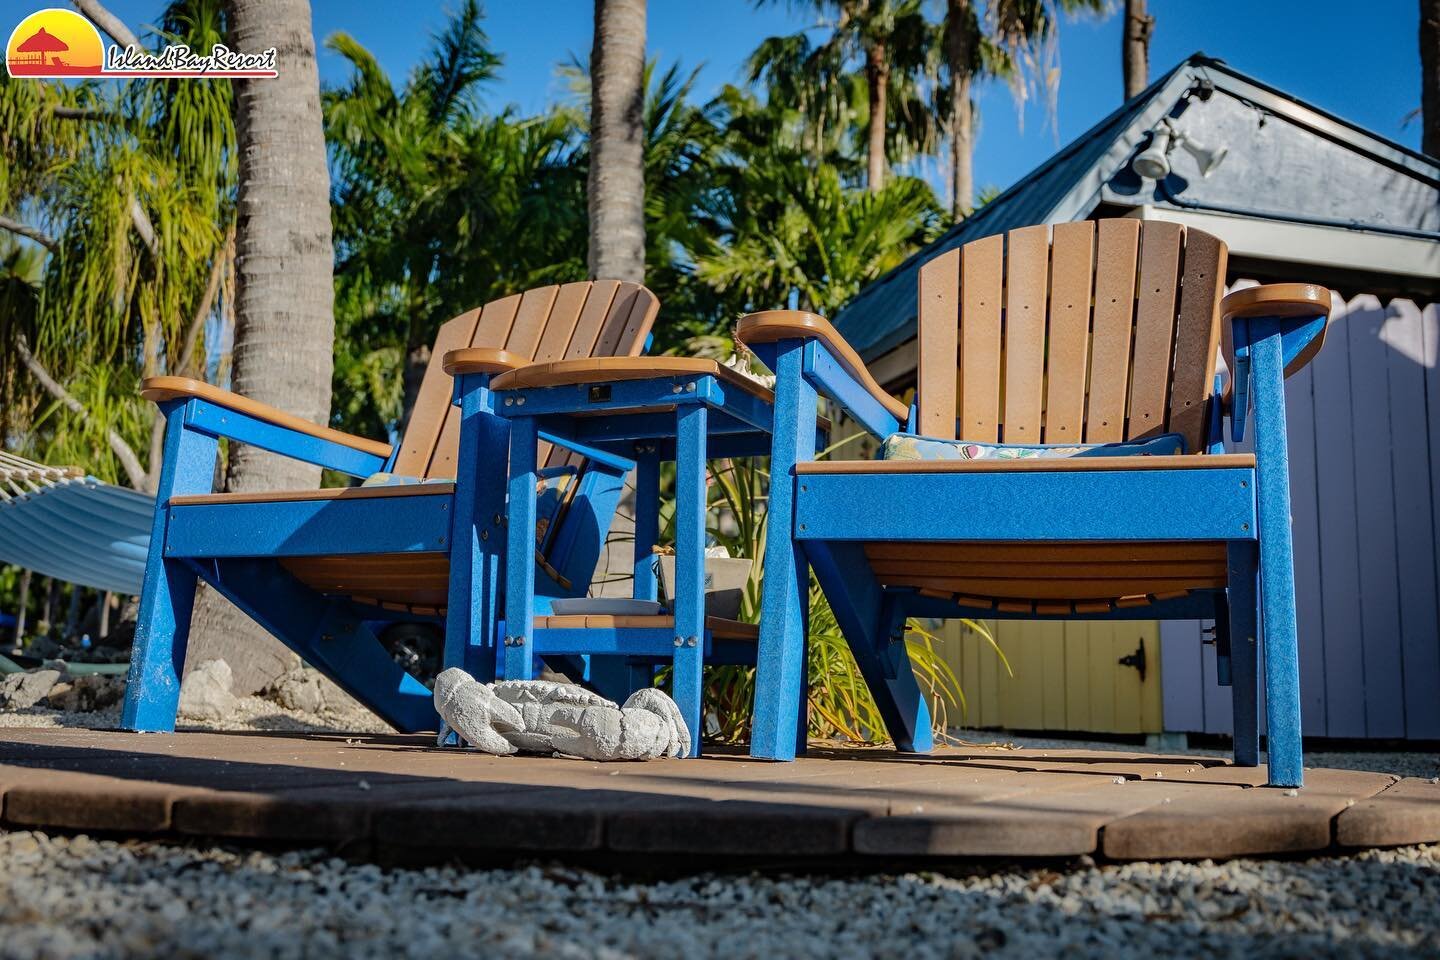 No need to pack your beach chairs for this trip to the Florida Keys! We are fully loaded on our private beach with plenty of outdoor seating, both in the sun and under tiki huts!⠀ 
⠀
⠀
#floridakeys #islandbayresort #Keys #thefloridakeys #Islamorada #